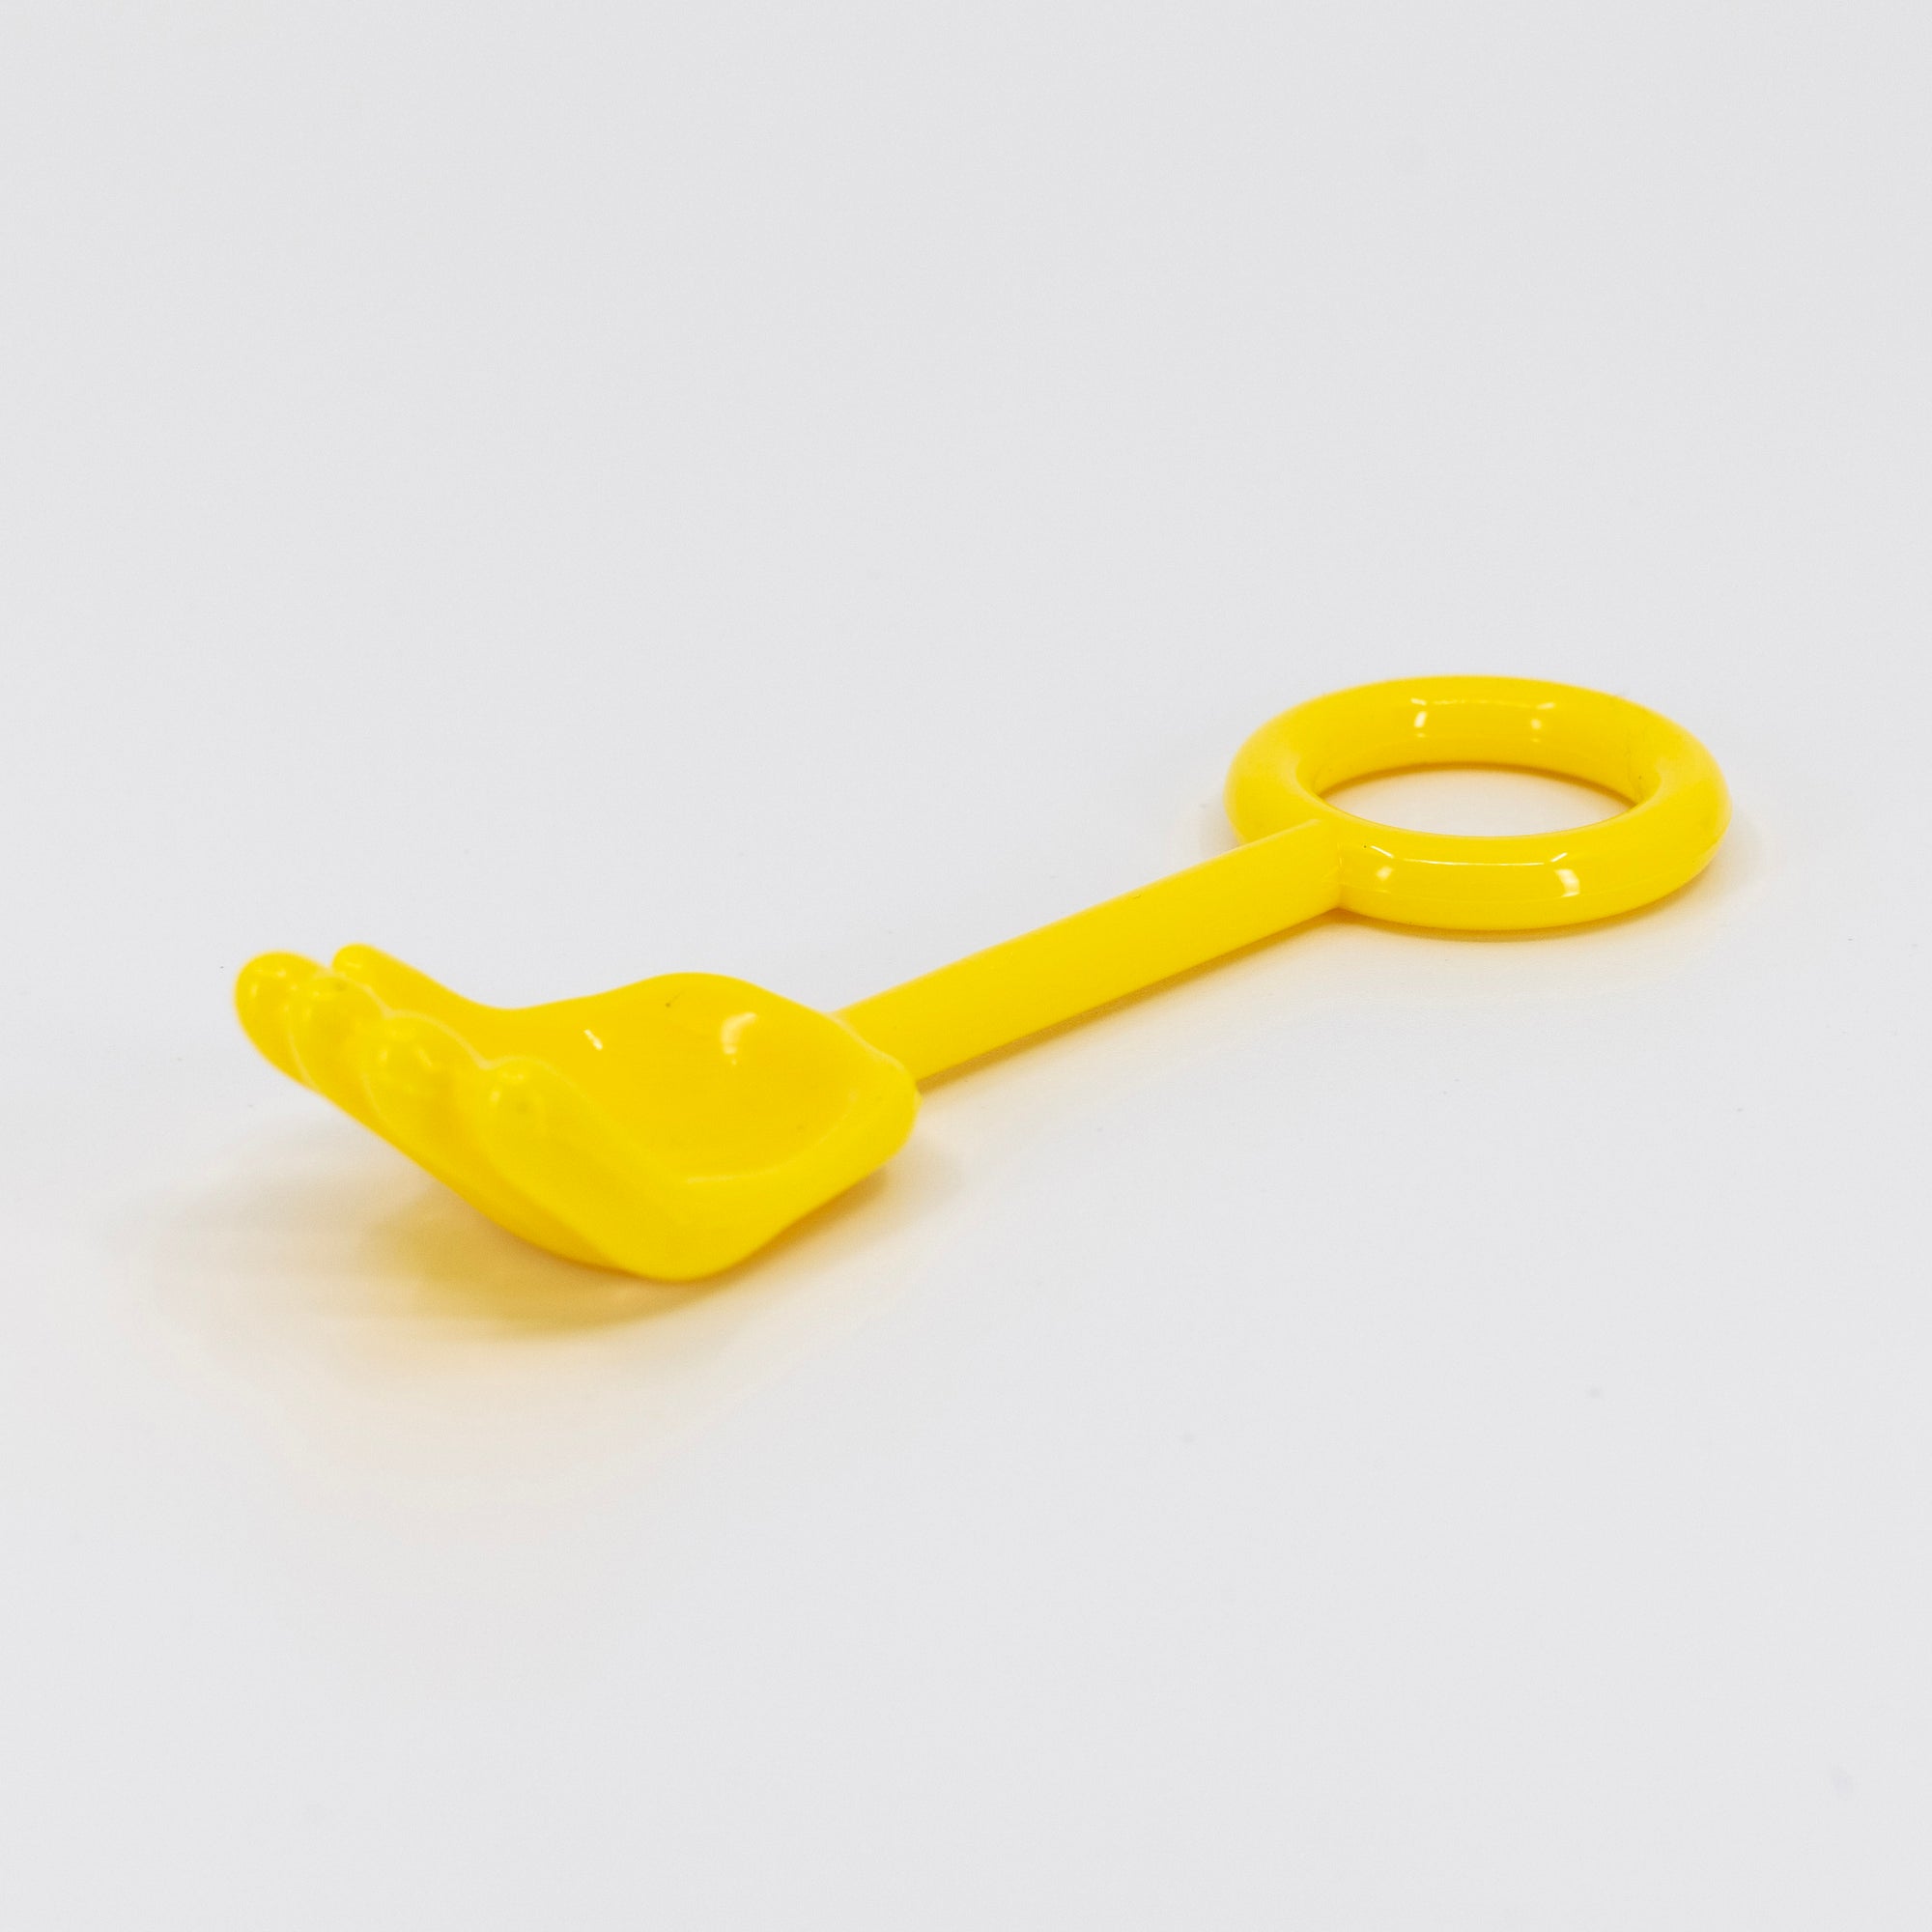 Yellow Handy Spoon is great for dispensing SPLATZ soap balls and blowing bubbles